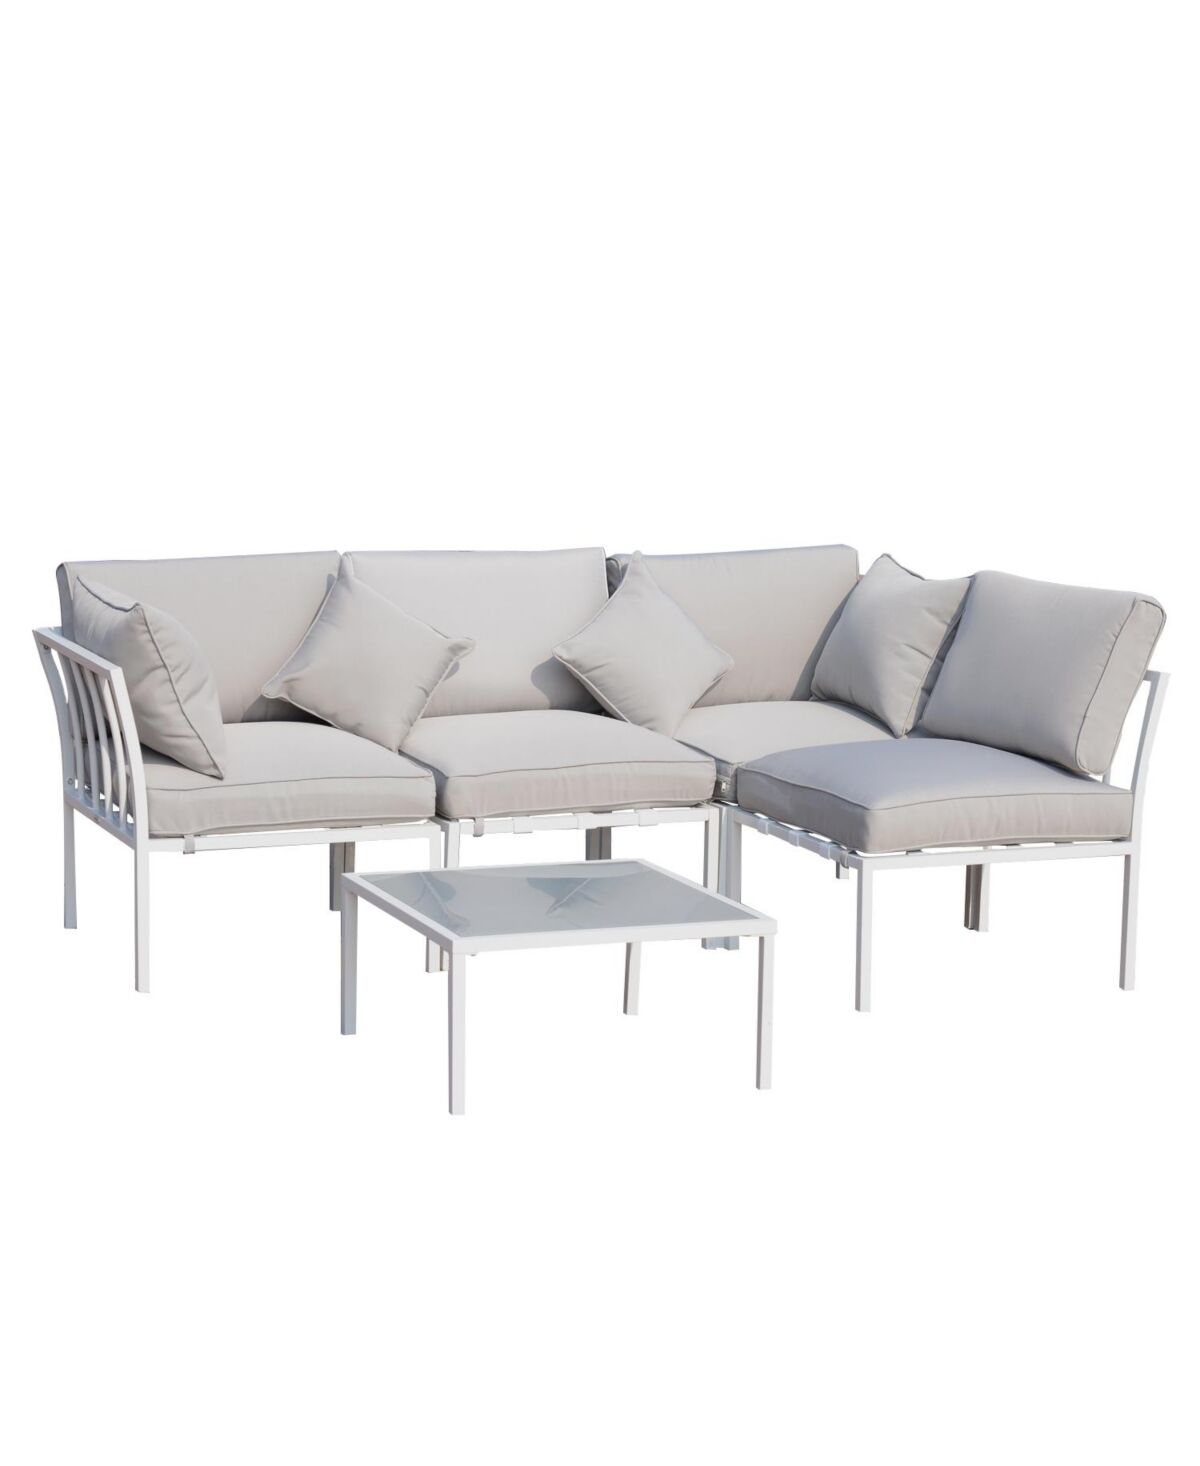 Outsunny 5 Piece Outdoor Furniture Patio Conversation Seating Set, 2 Sofa Chairs, & Coffee Table, White - White